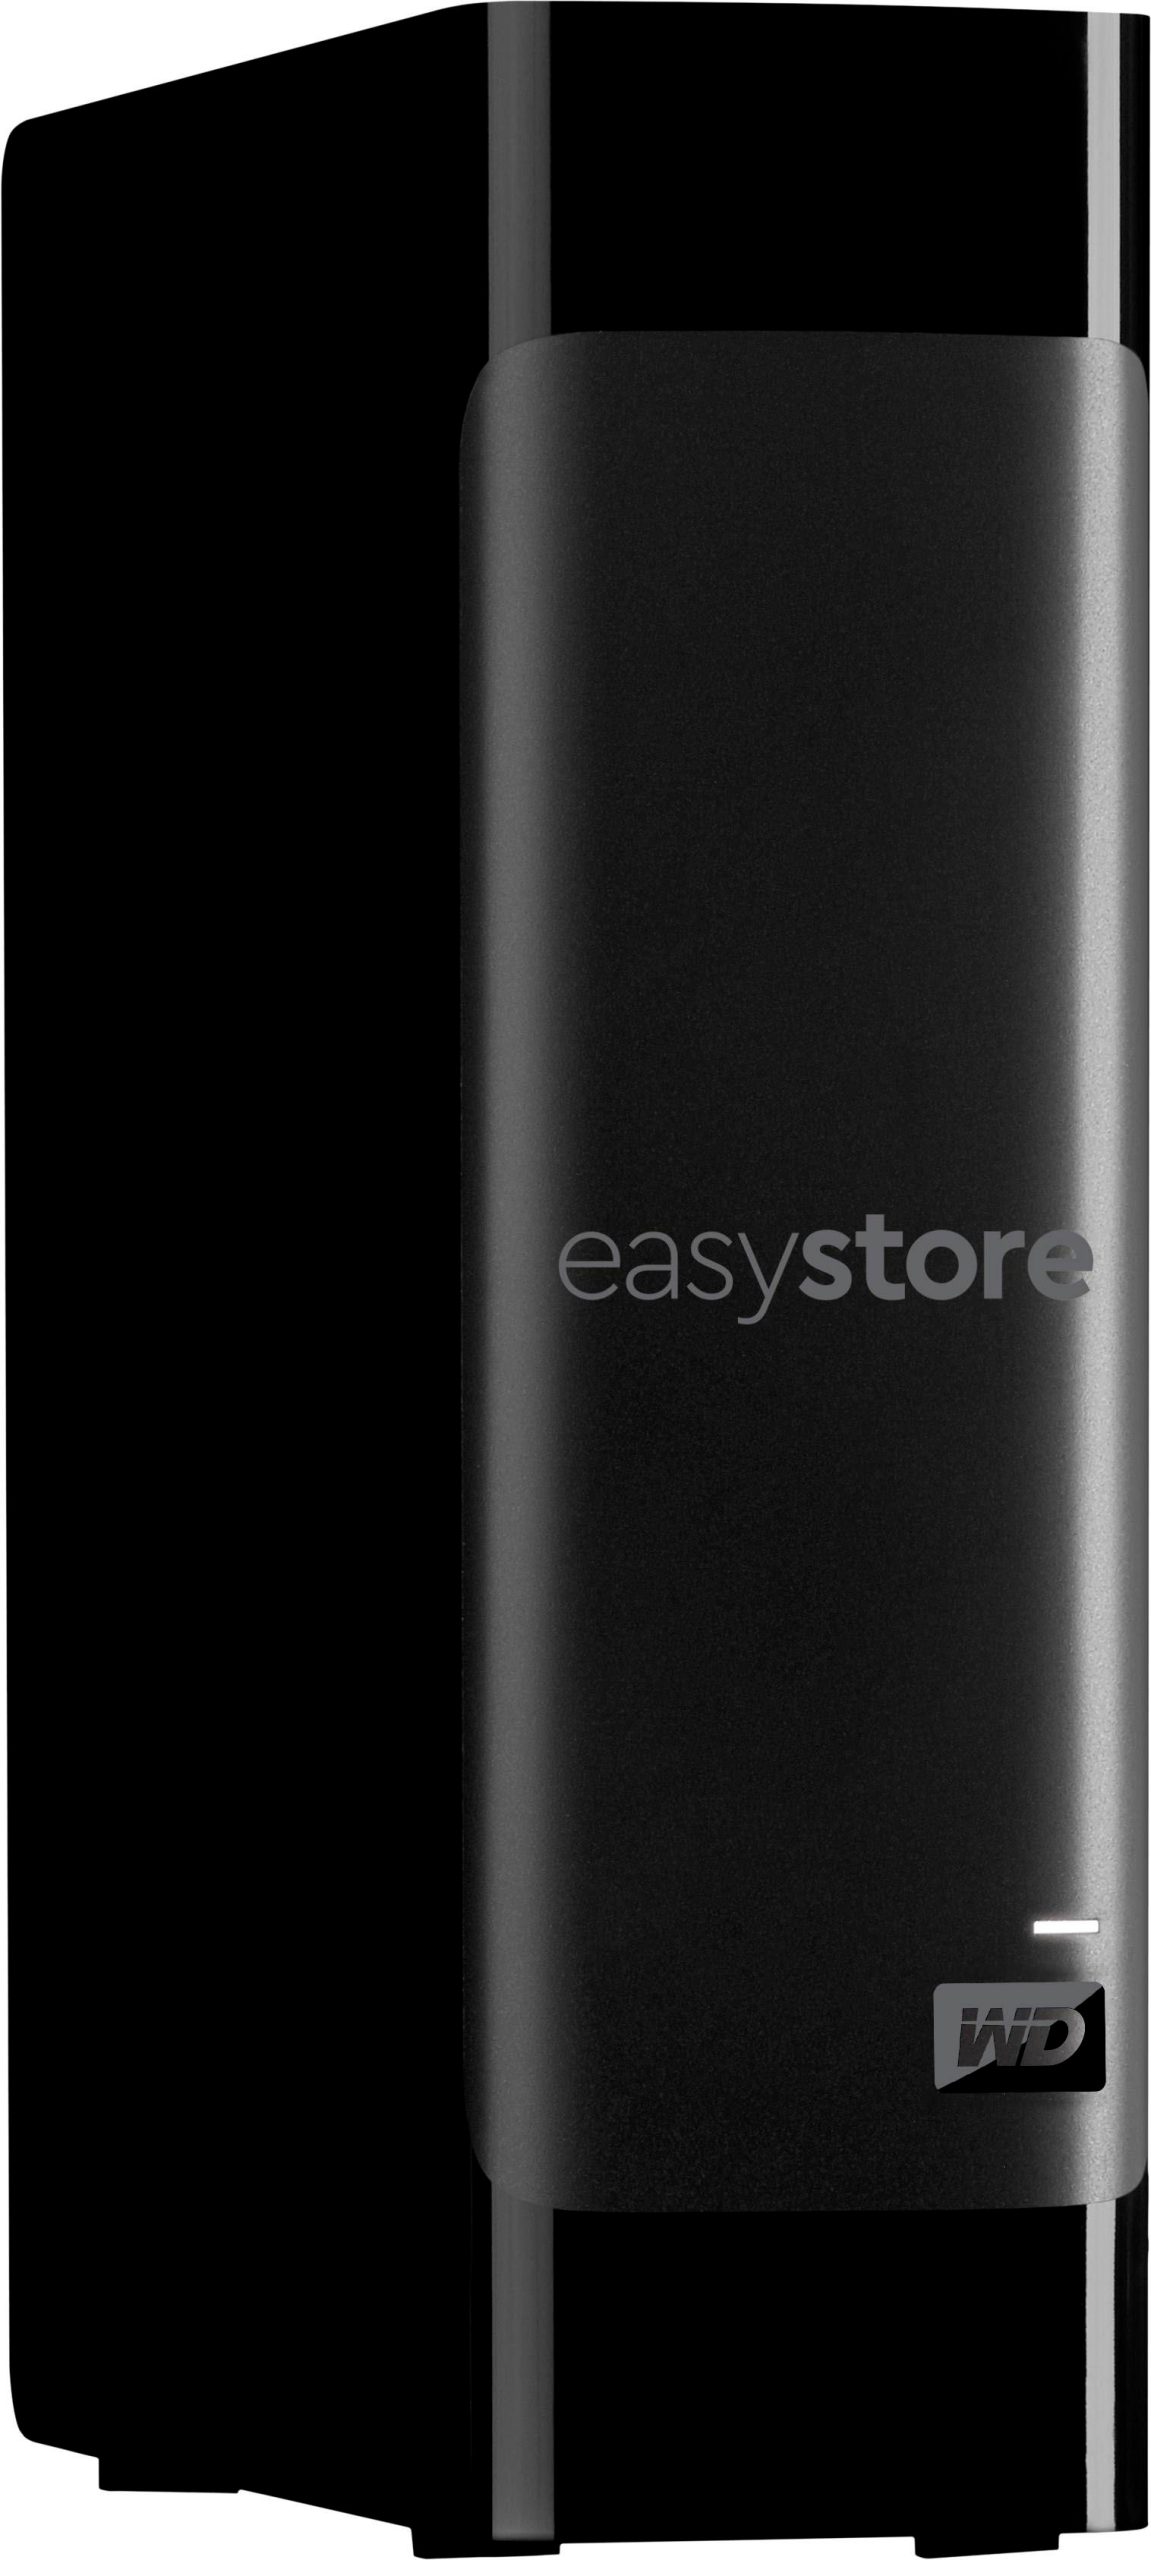 WD – easystore 18TB External USB 3.0 Portable Hard Drive – Black – Just $319.99 at Best Buy